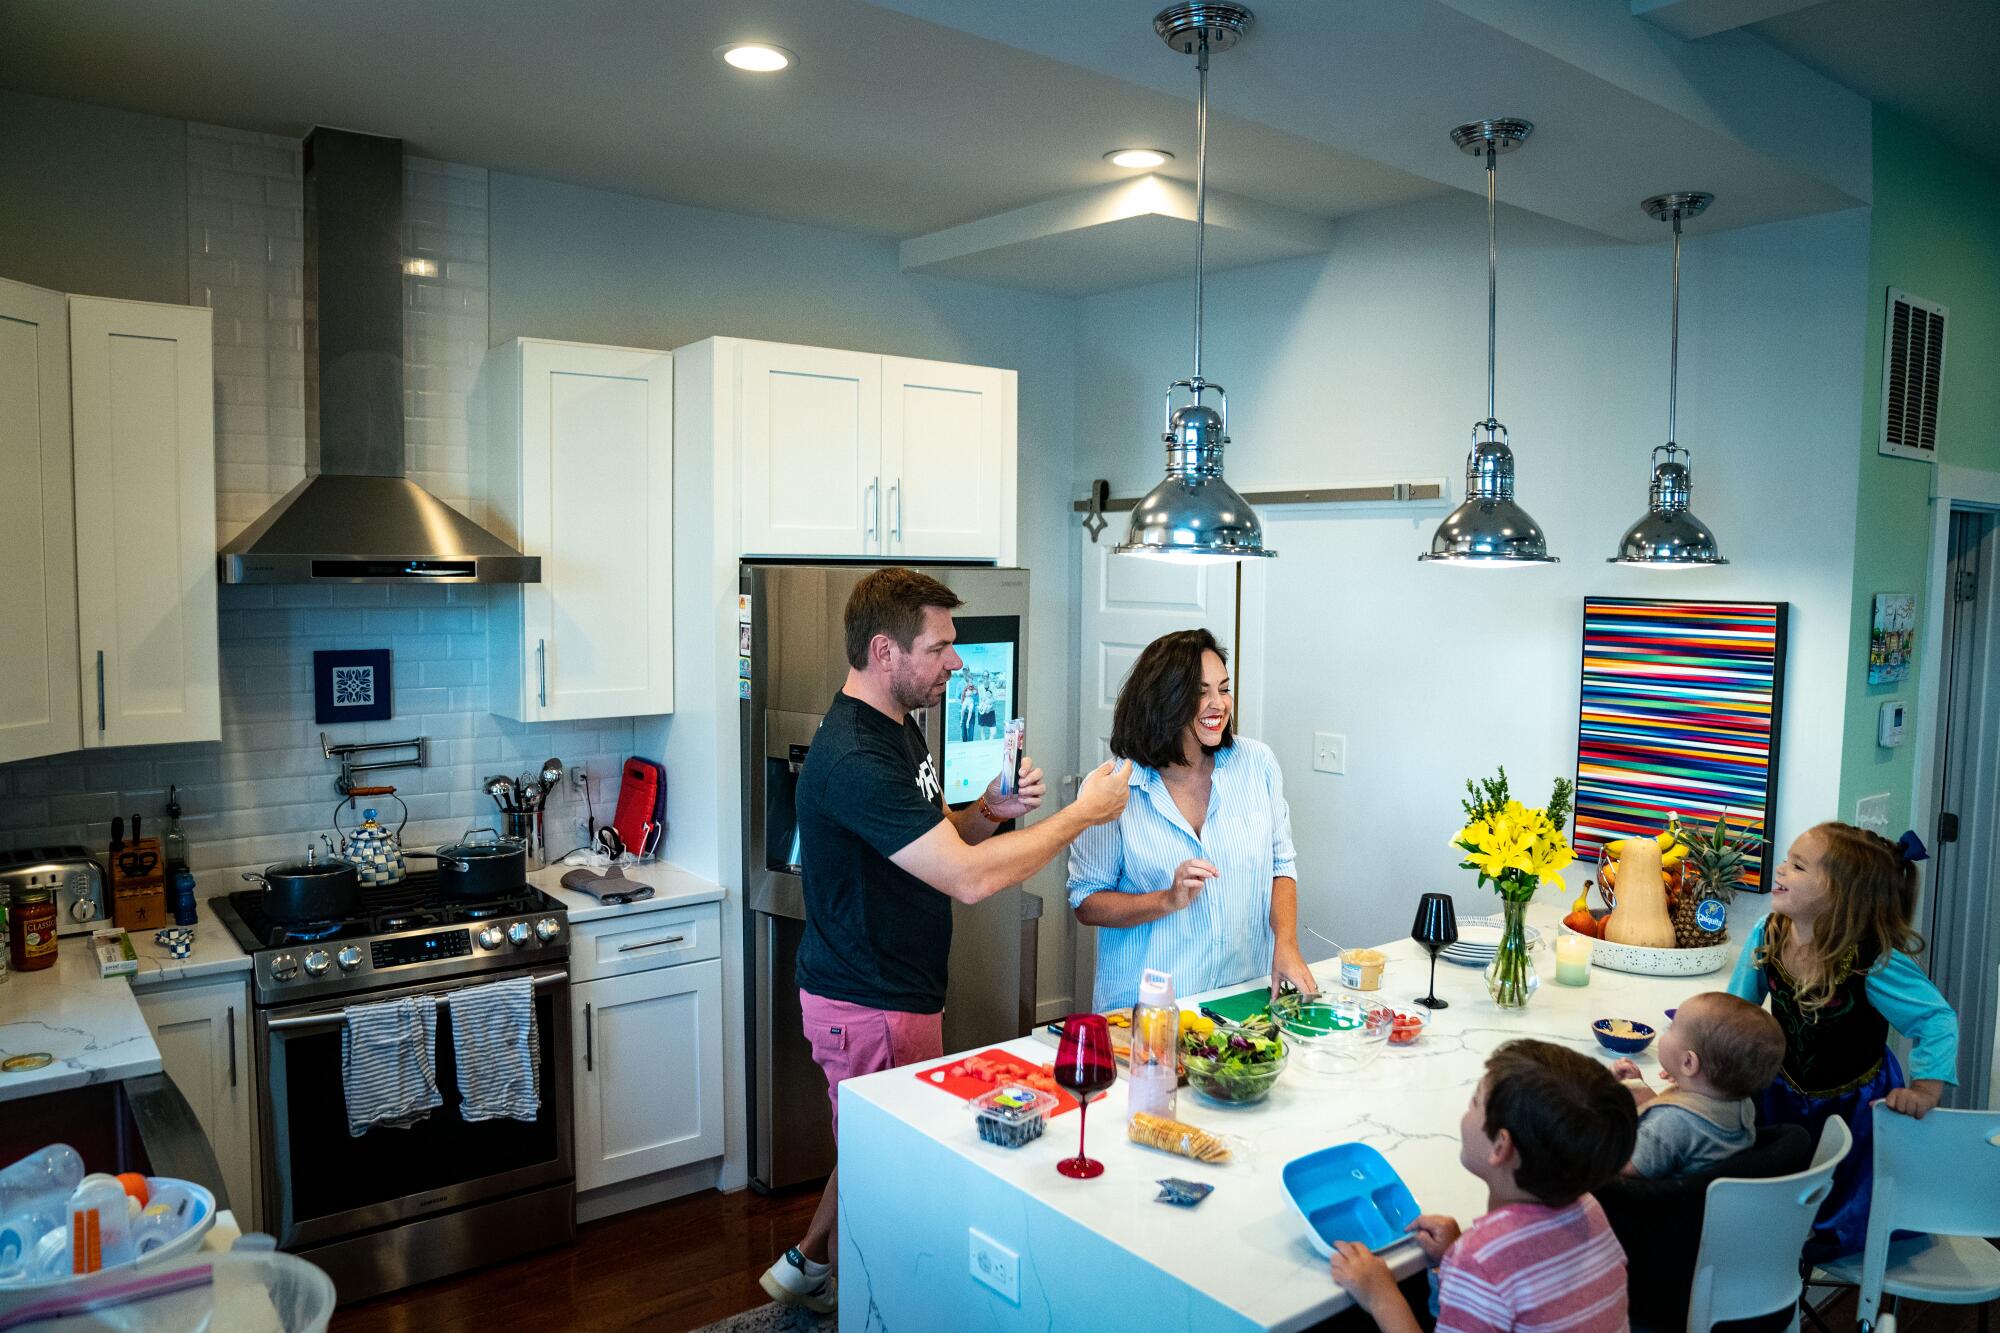 Rep. Eric Swalwell and Brittany Watts make snacks for their children in their kitchen.